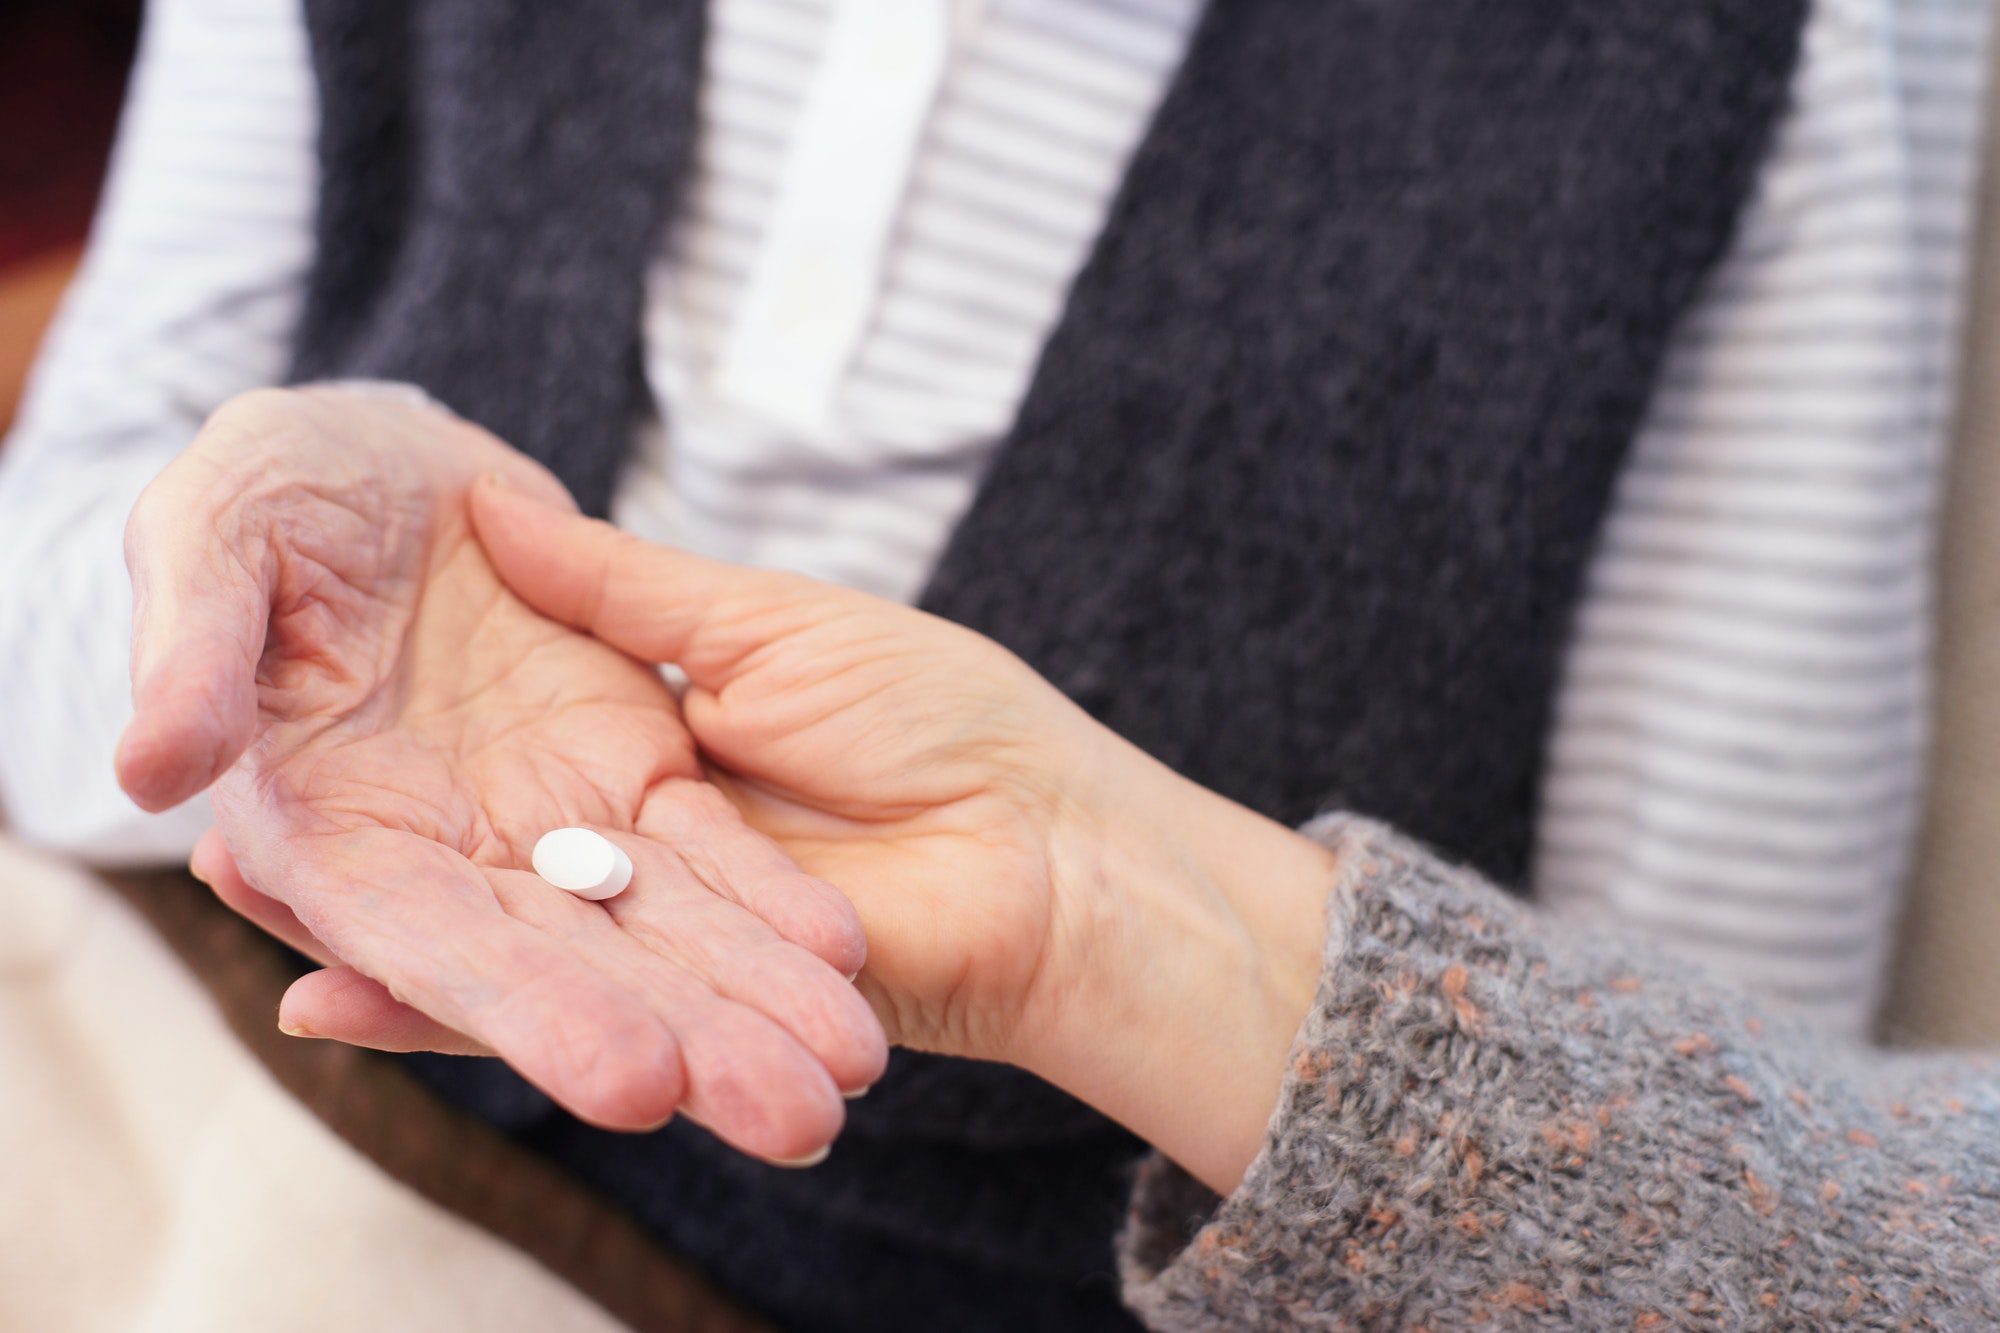 Senior being handed a daily medication from caregiver acquired through Medicare Part D